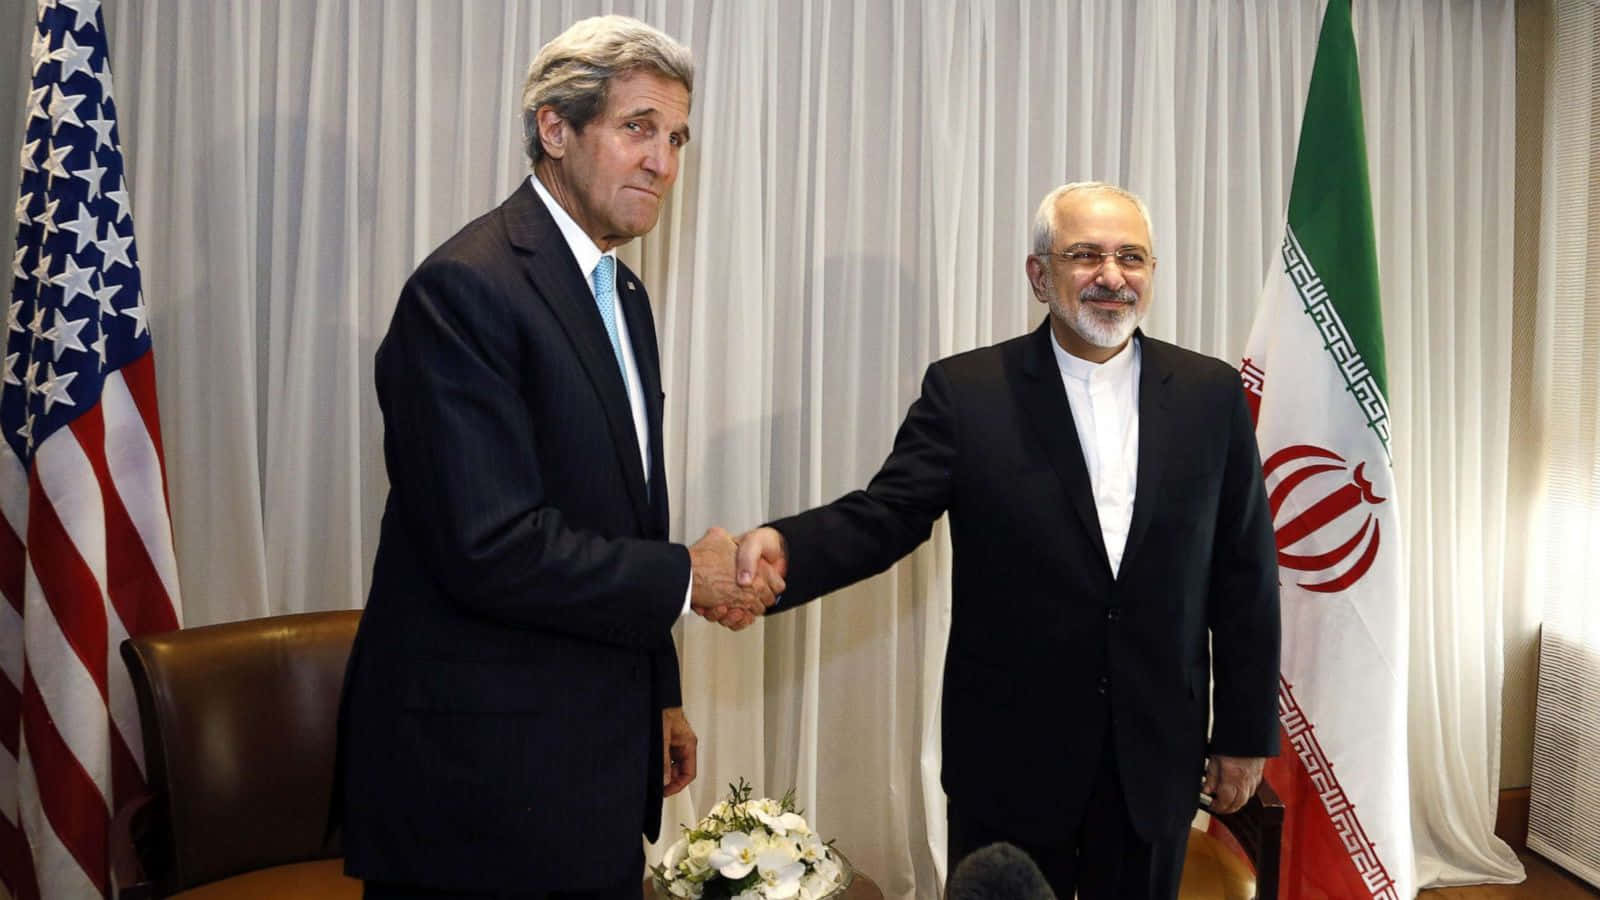 John Kerry With Iran Foreign Minister Wallpaper